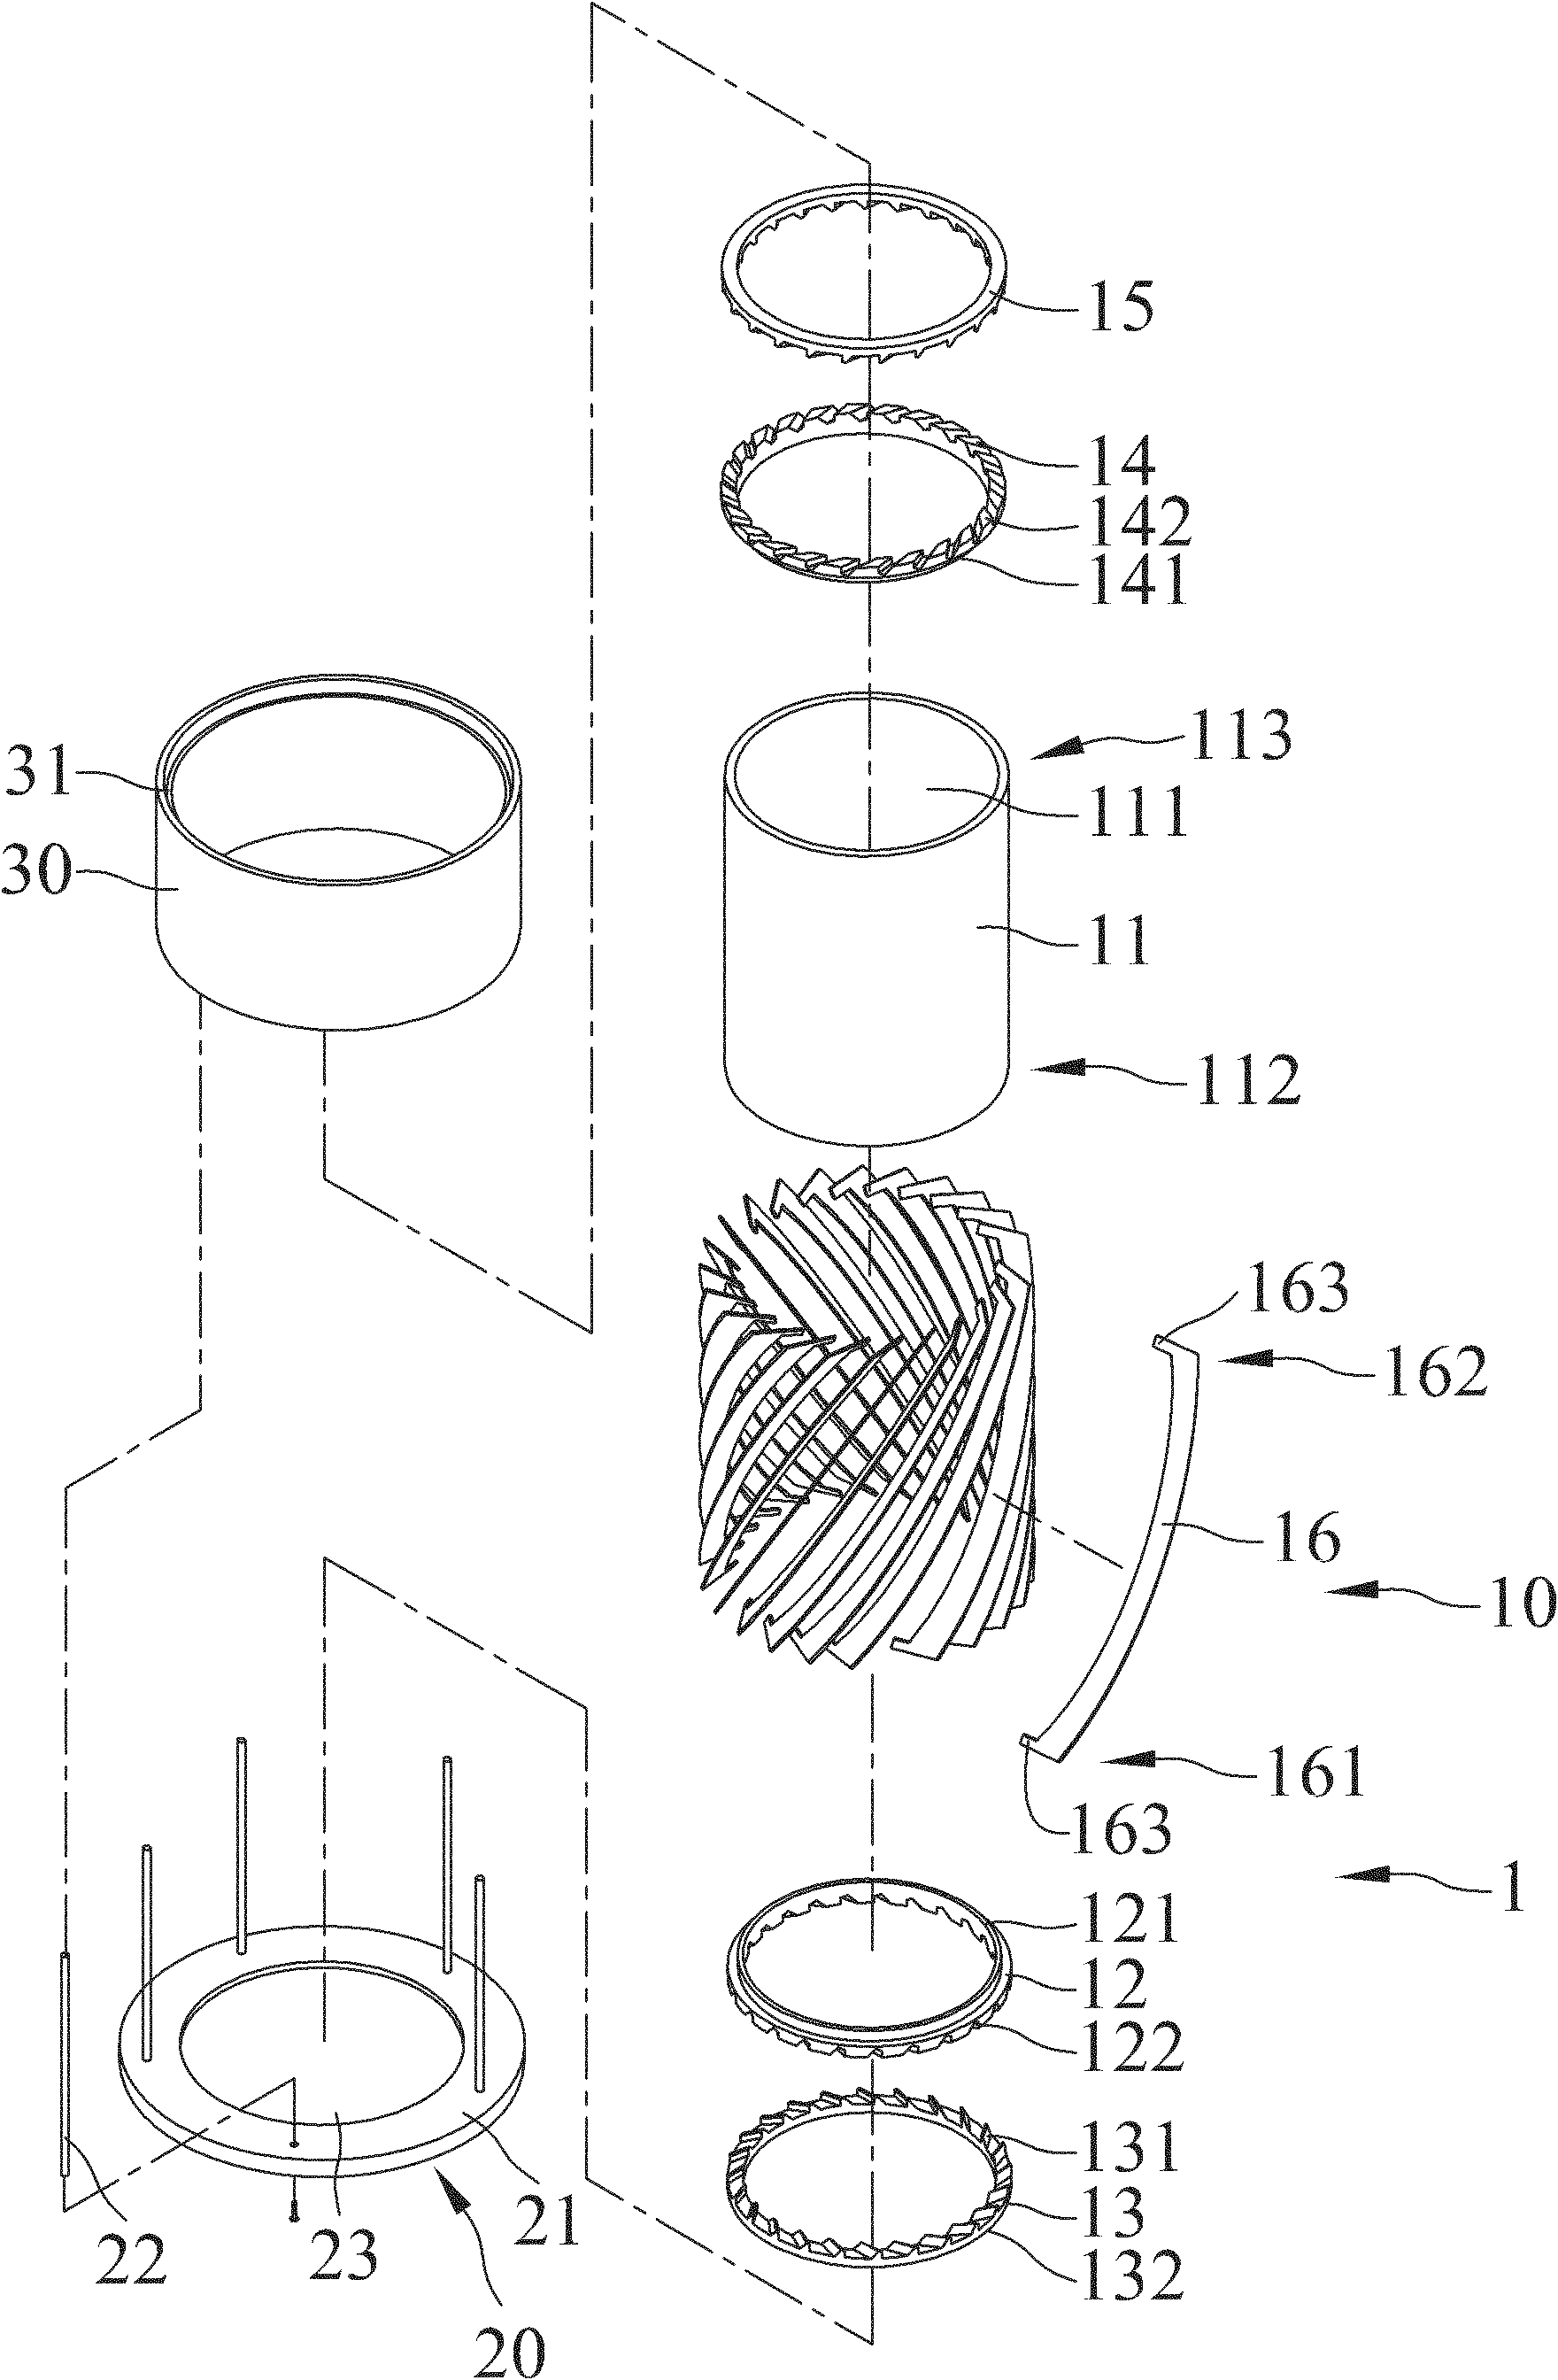 Device capable of increasing flame height